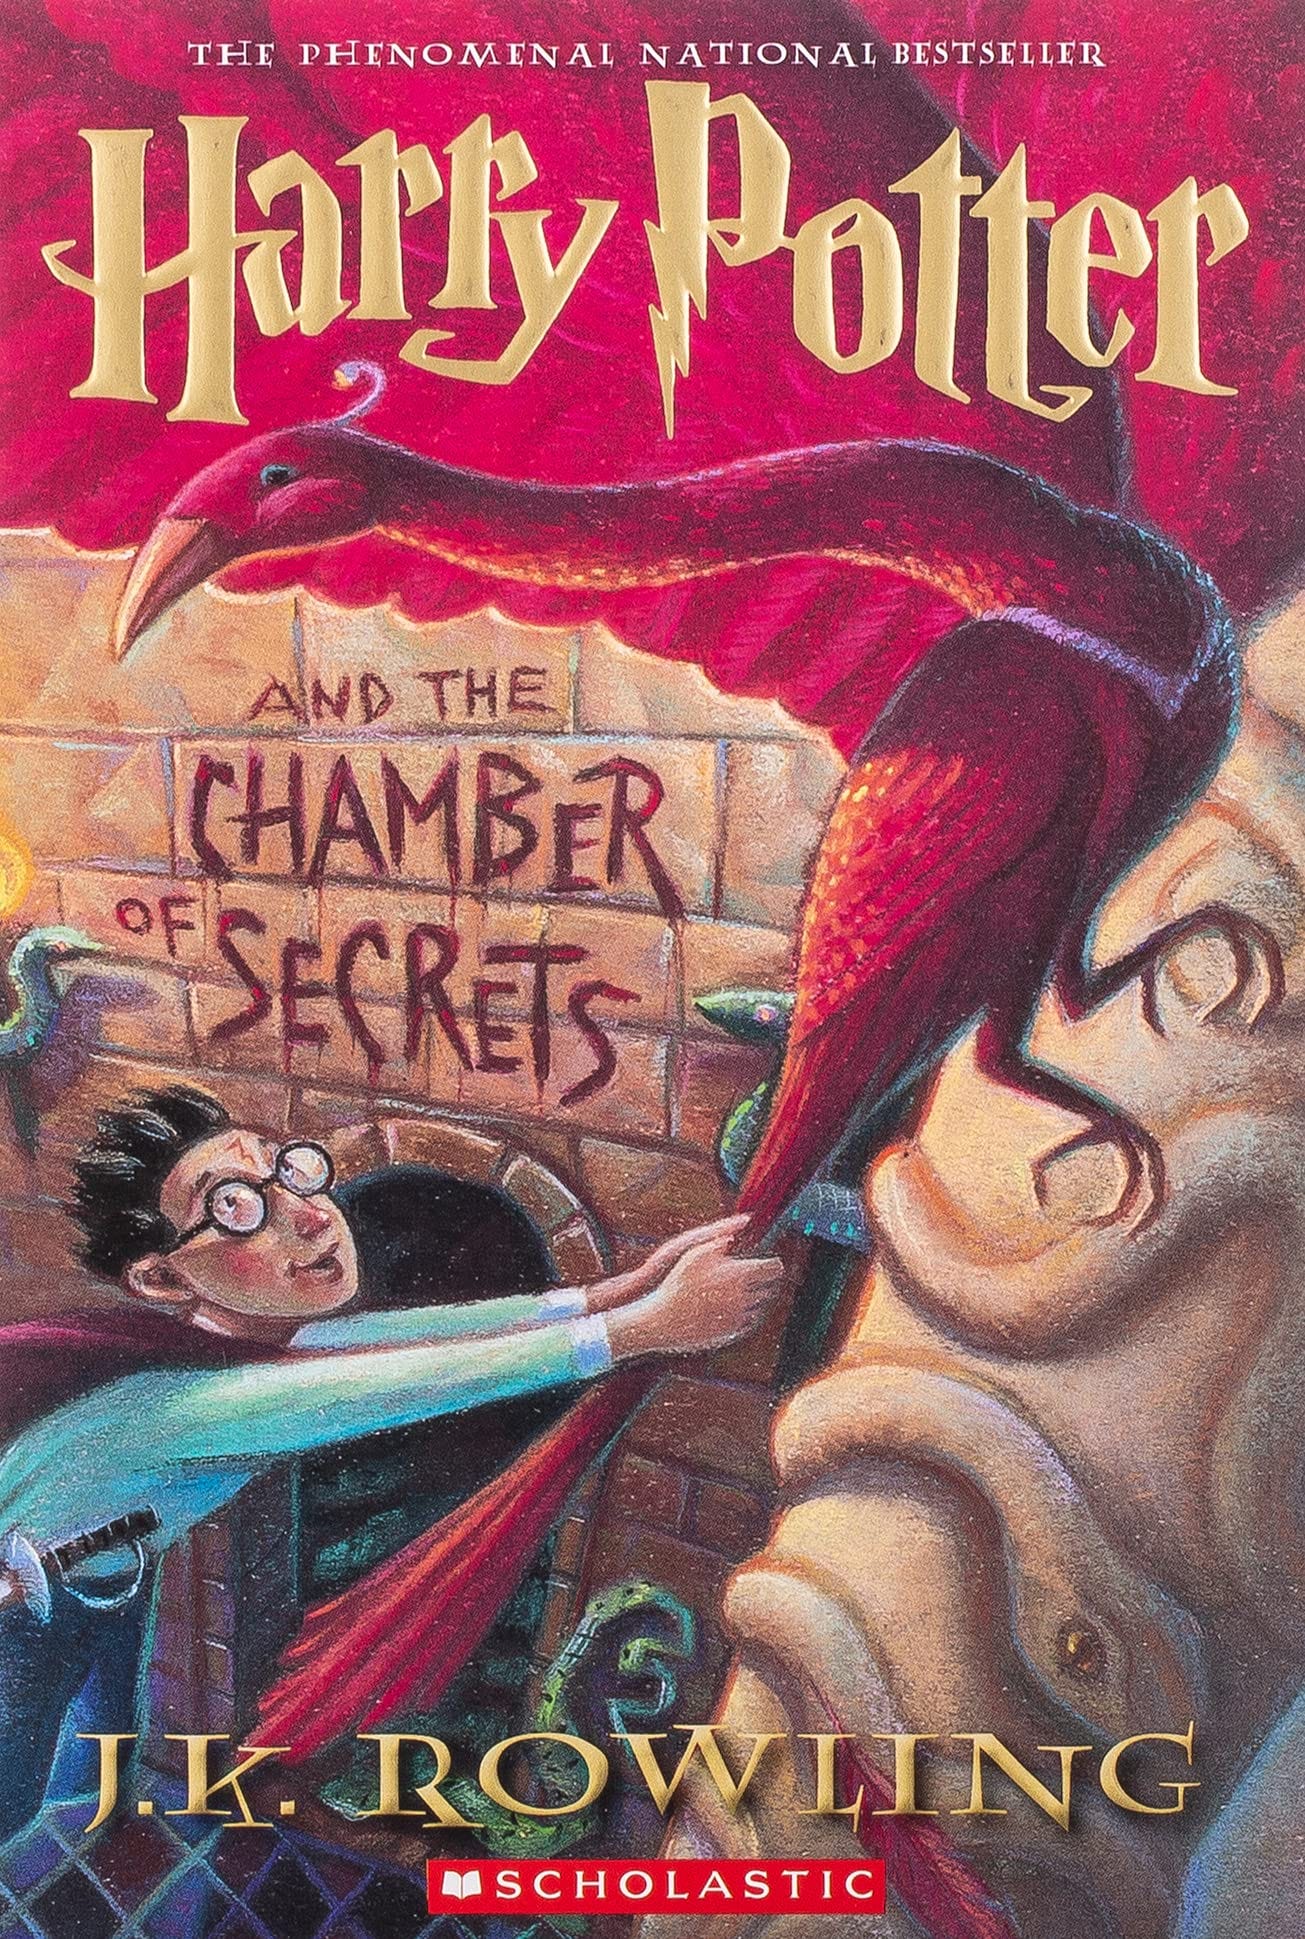 Amazon - Harry Potter and the Chamber of Secrets (2): J. K. Rowling, Mary  GrandPré: 8580001045948: Video Games